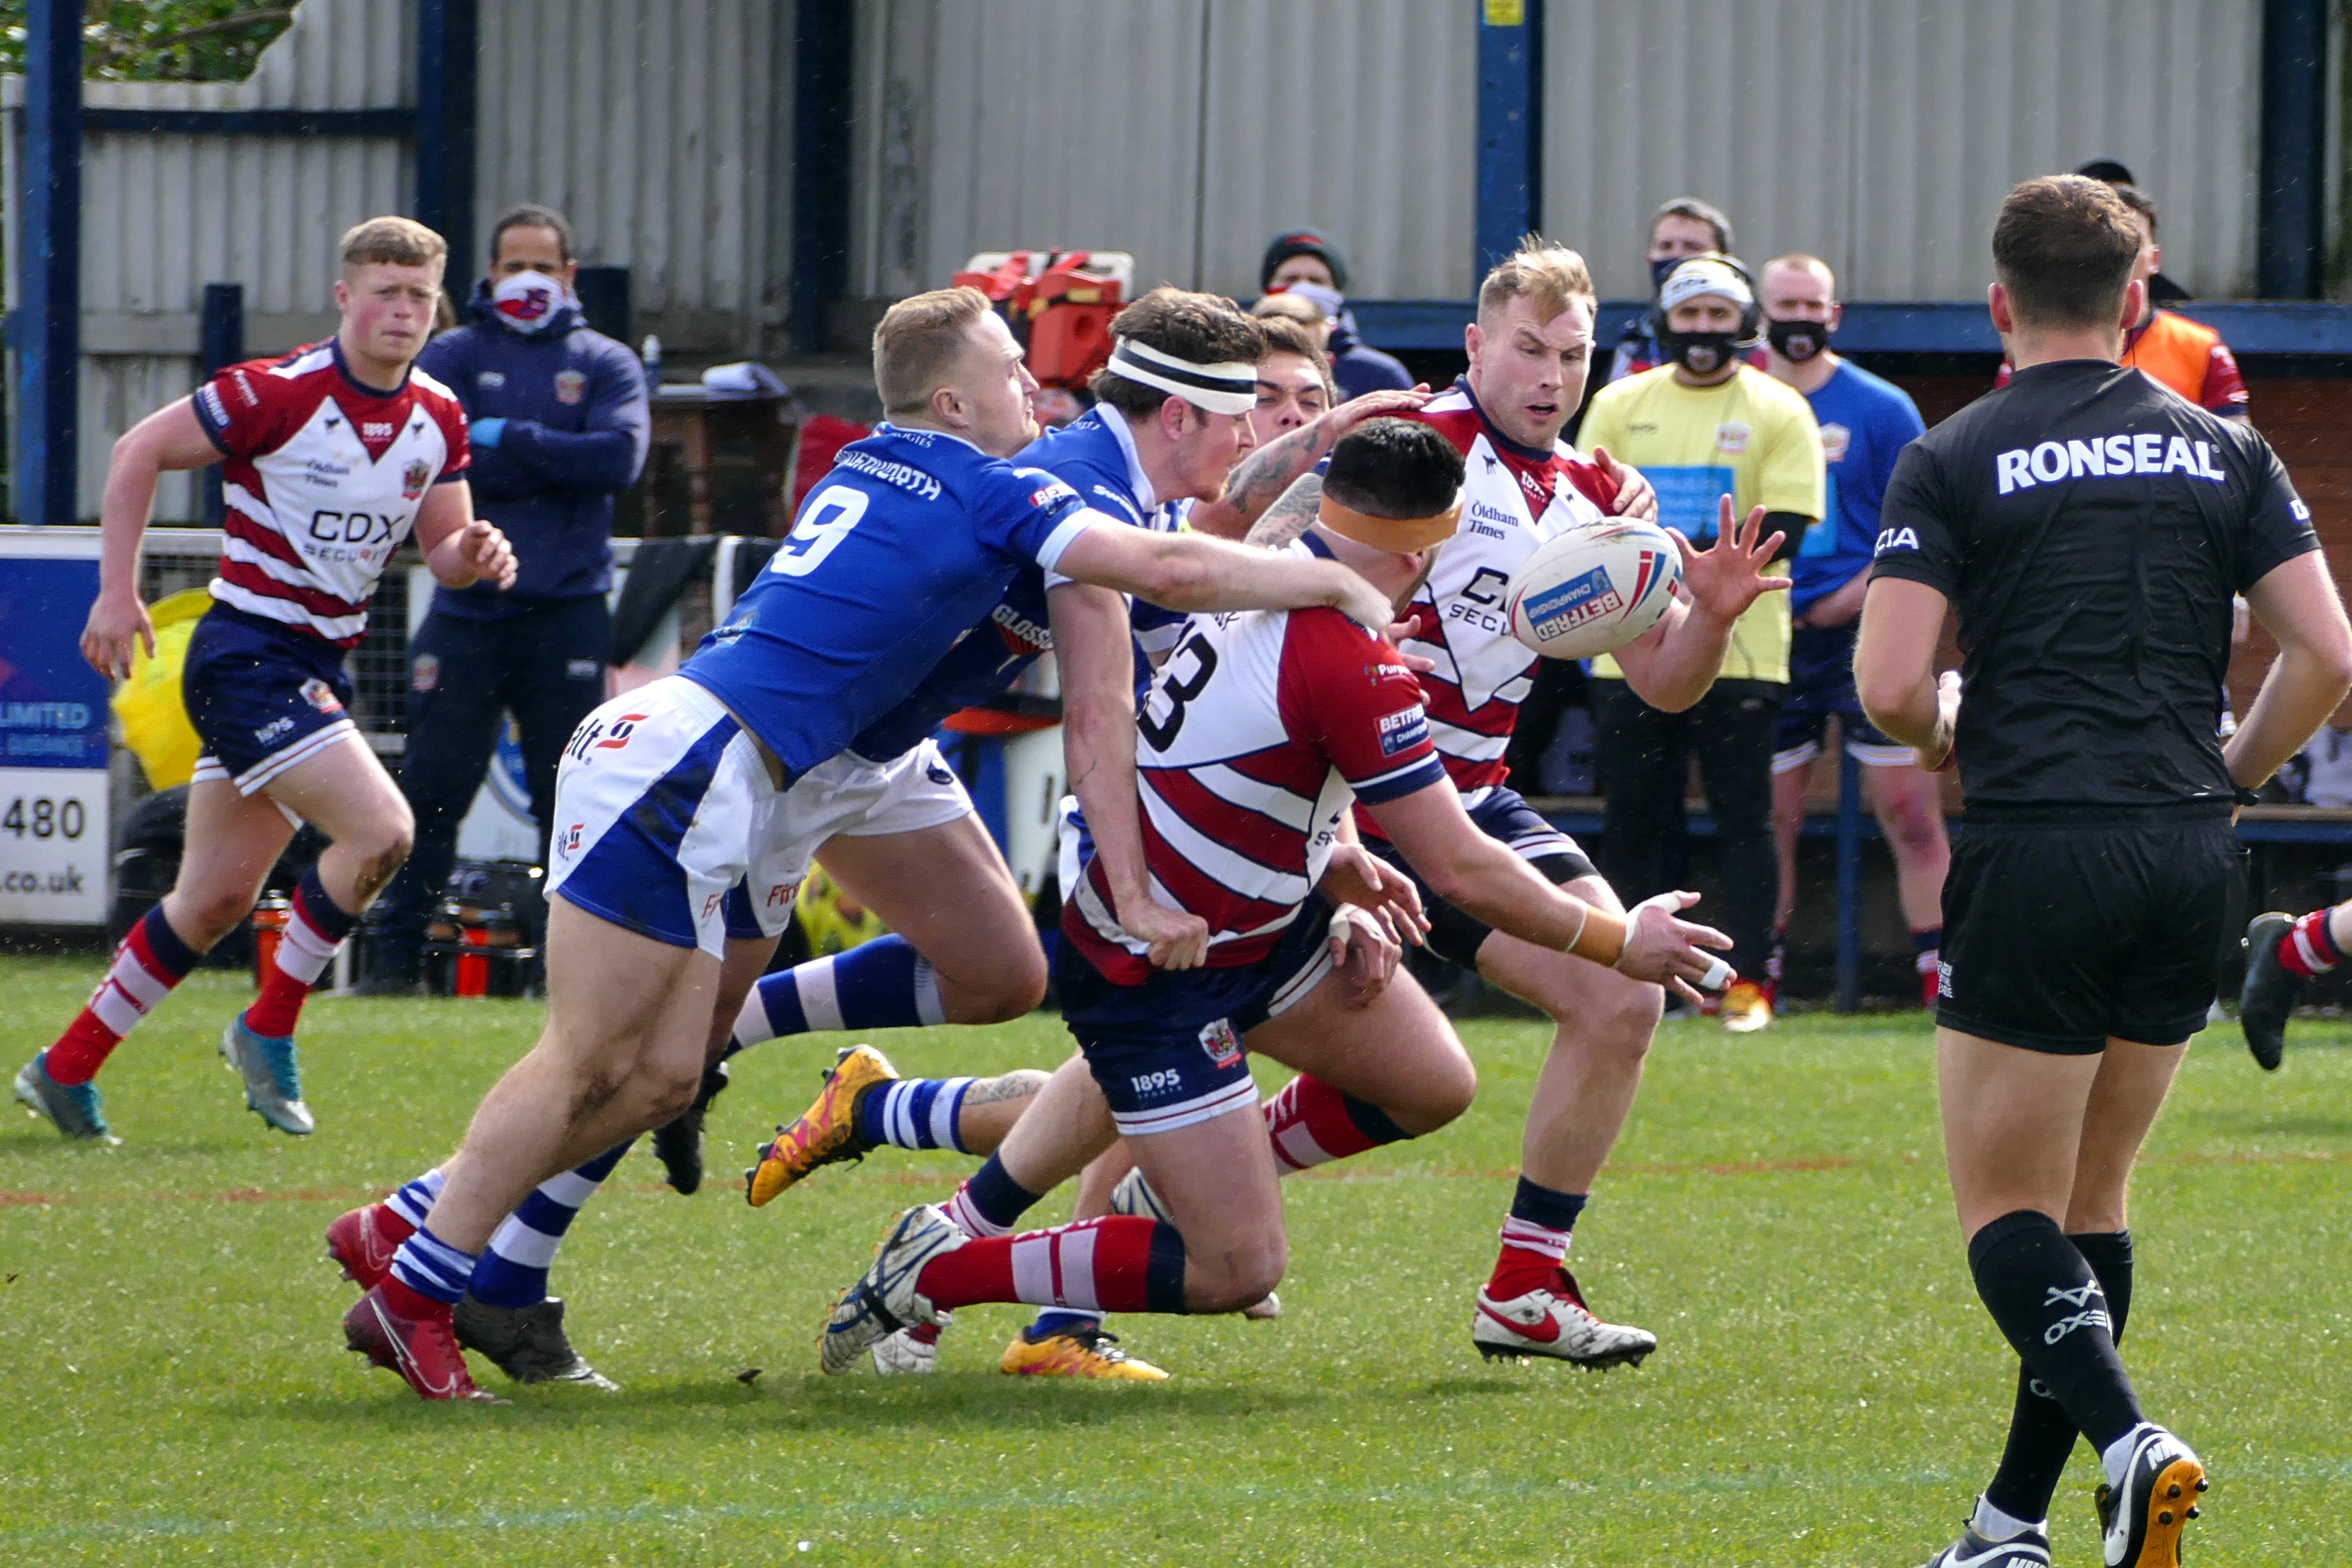 Reilly offloads to Danny Langtree